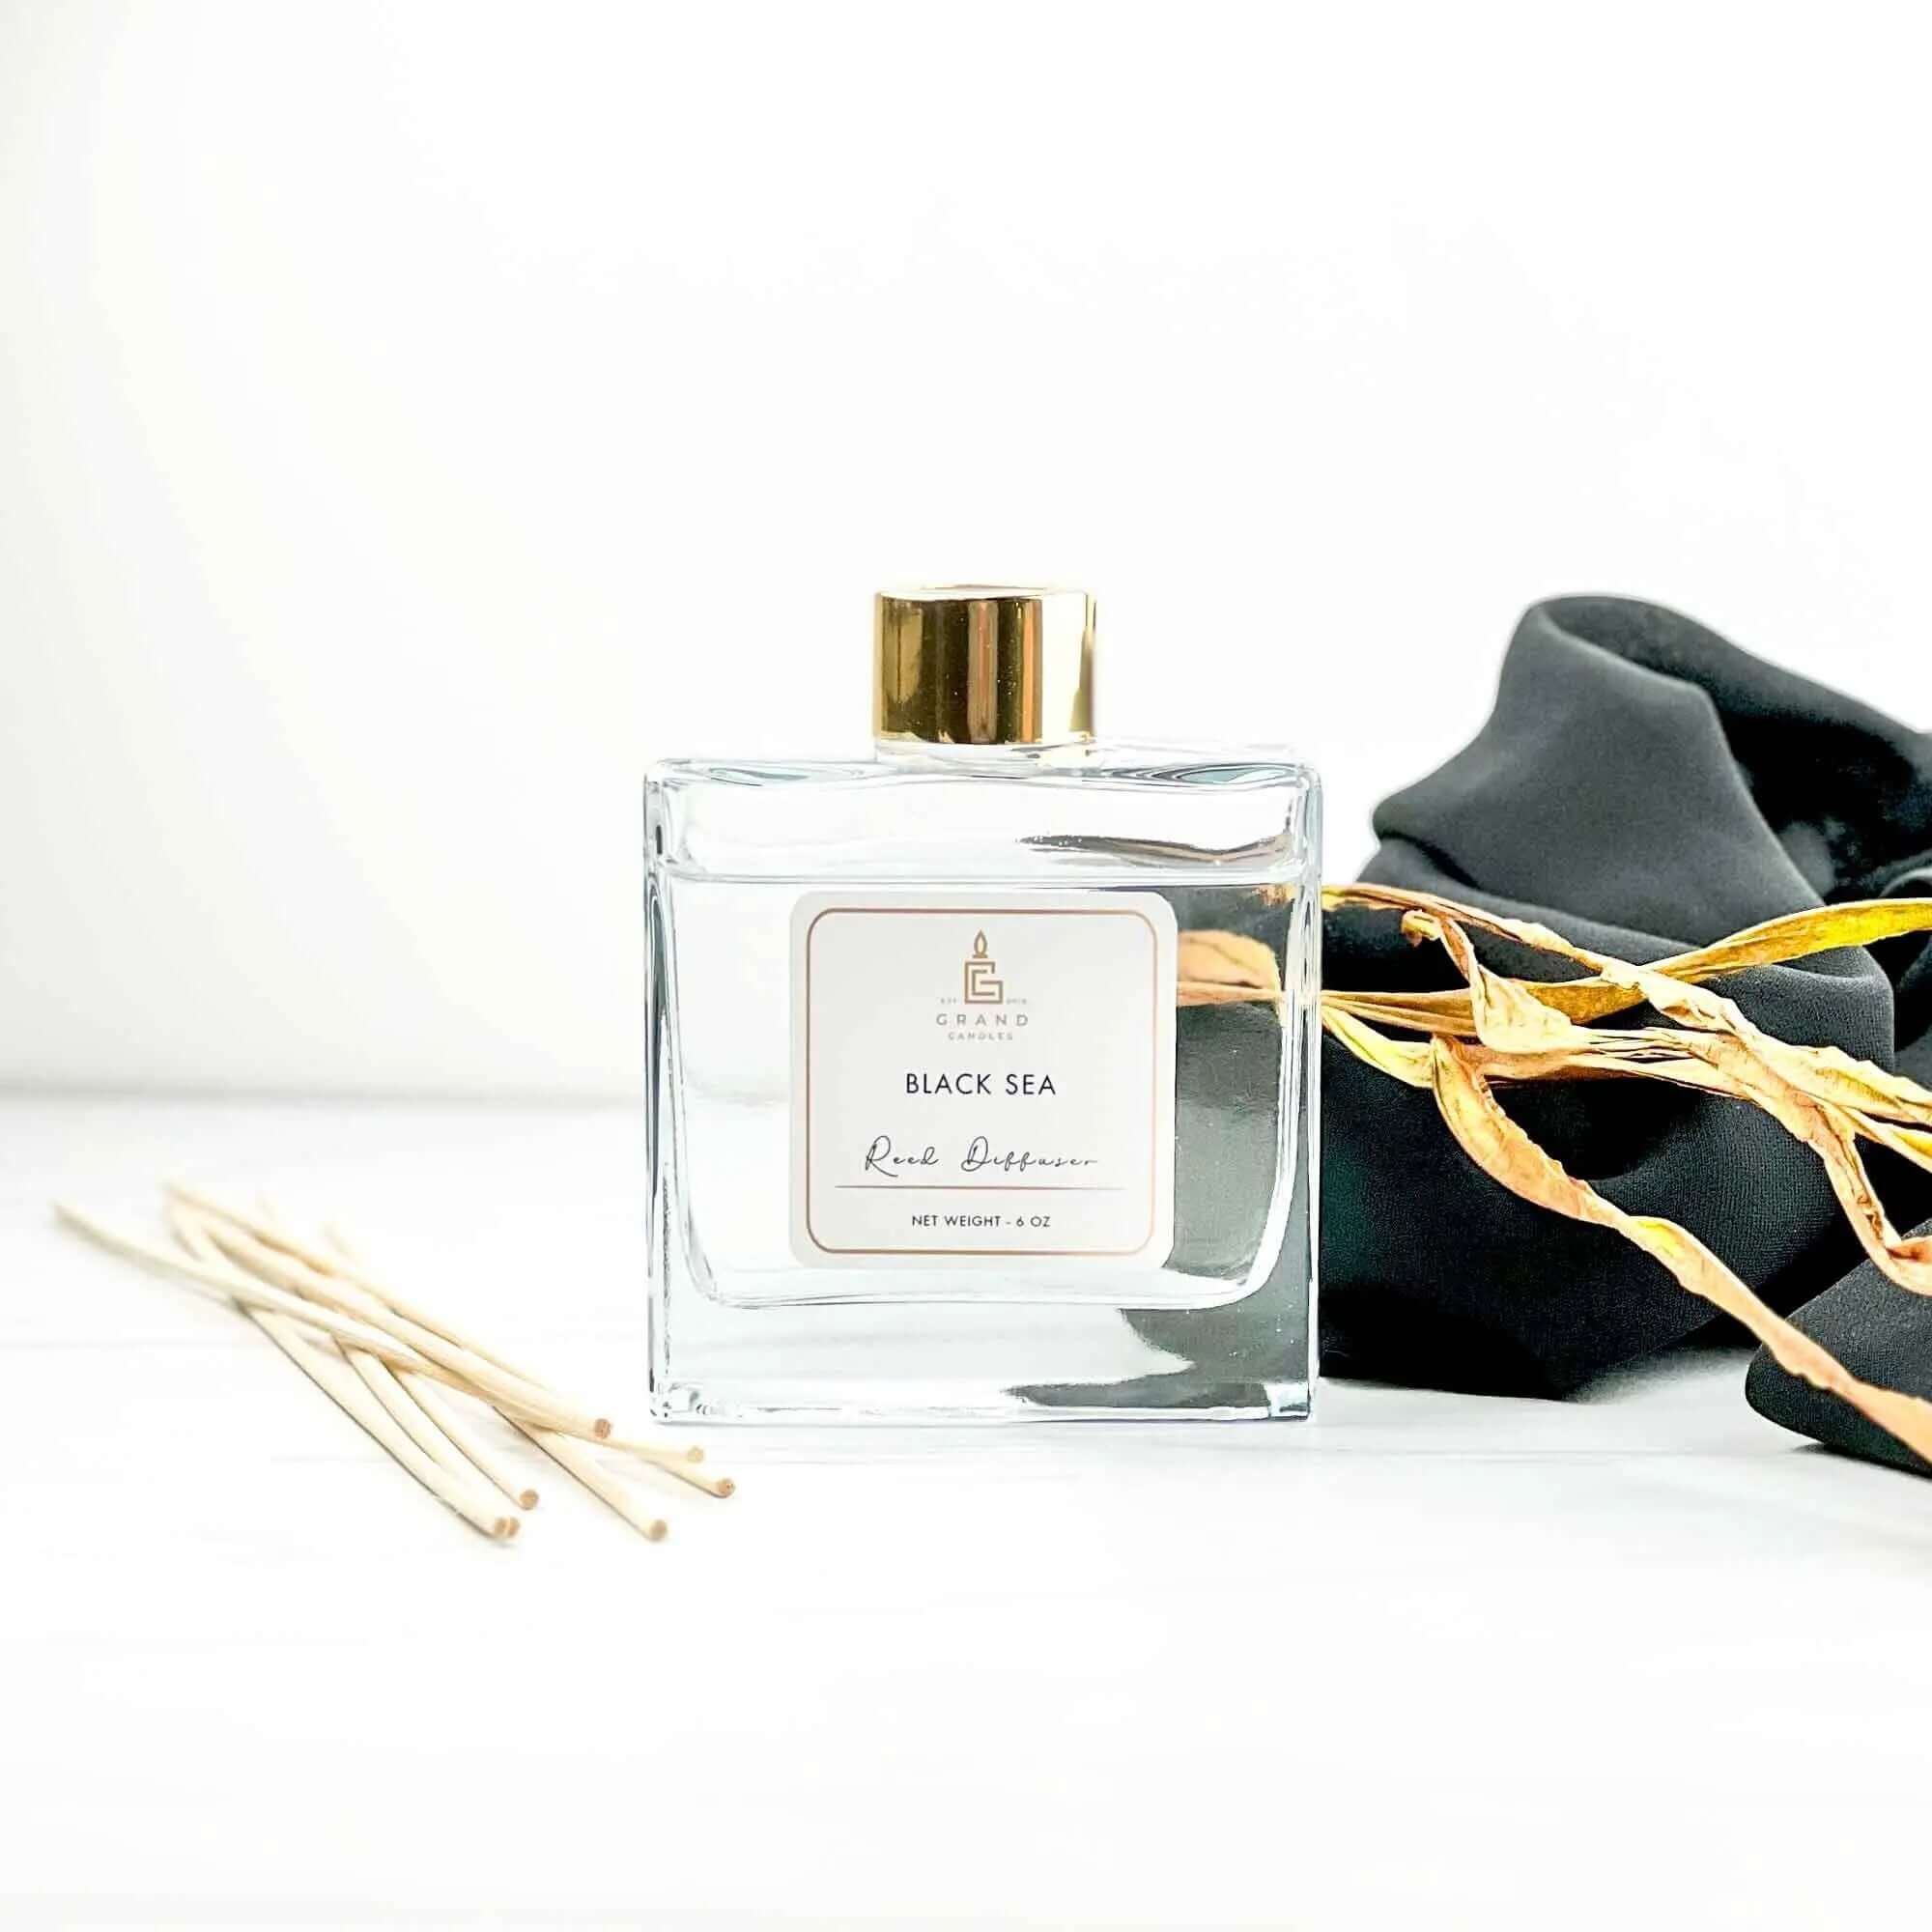 Black Sea Reed Diffuser | Refreshing Scent Diffuser Set | Perfect Home Decor Gift with Essential Oils